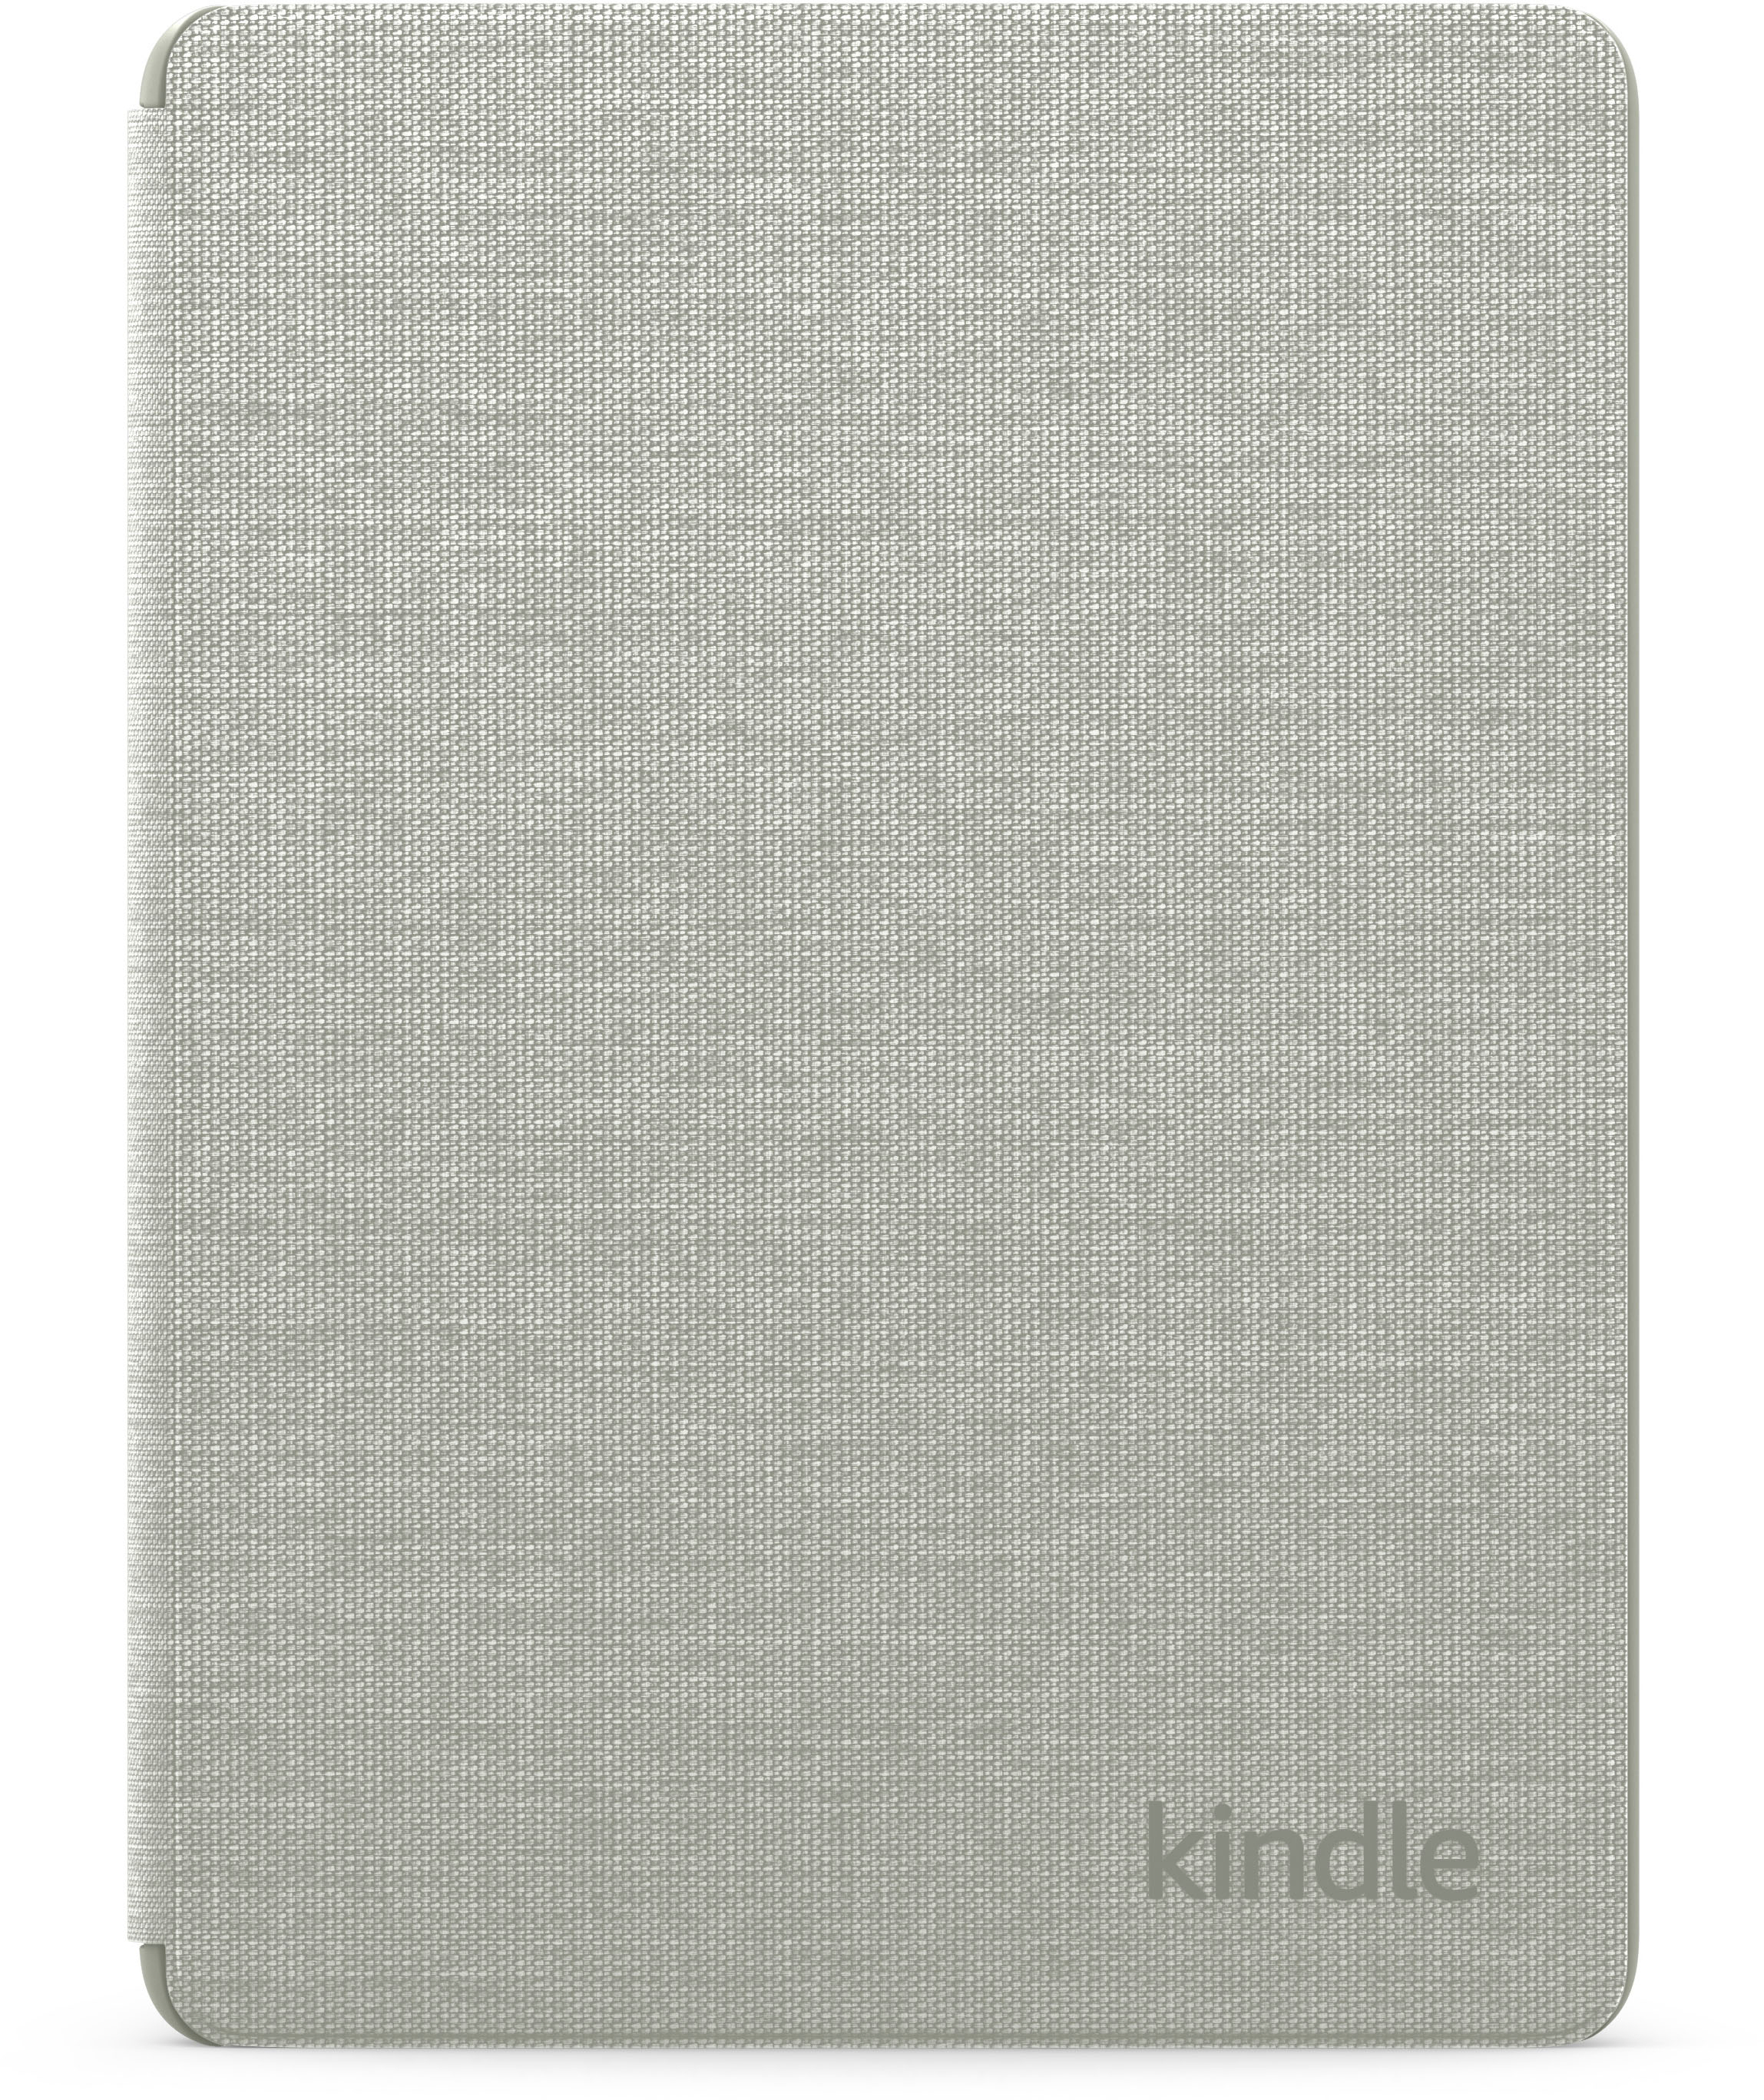 Kindle Paperwhite Cover Fabric (11th Generation-2021) Lavender Haze  B08VYZS786 - Best Buy